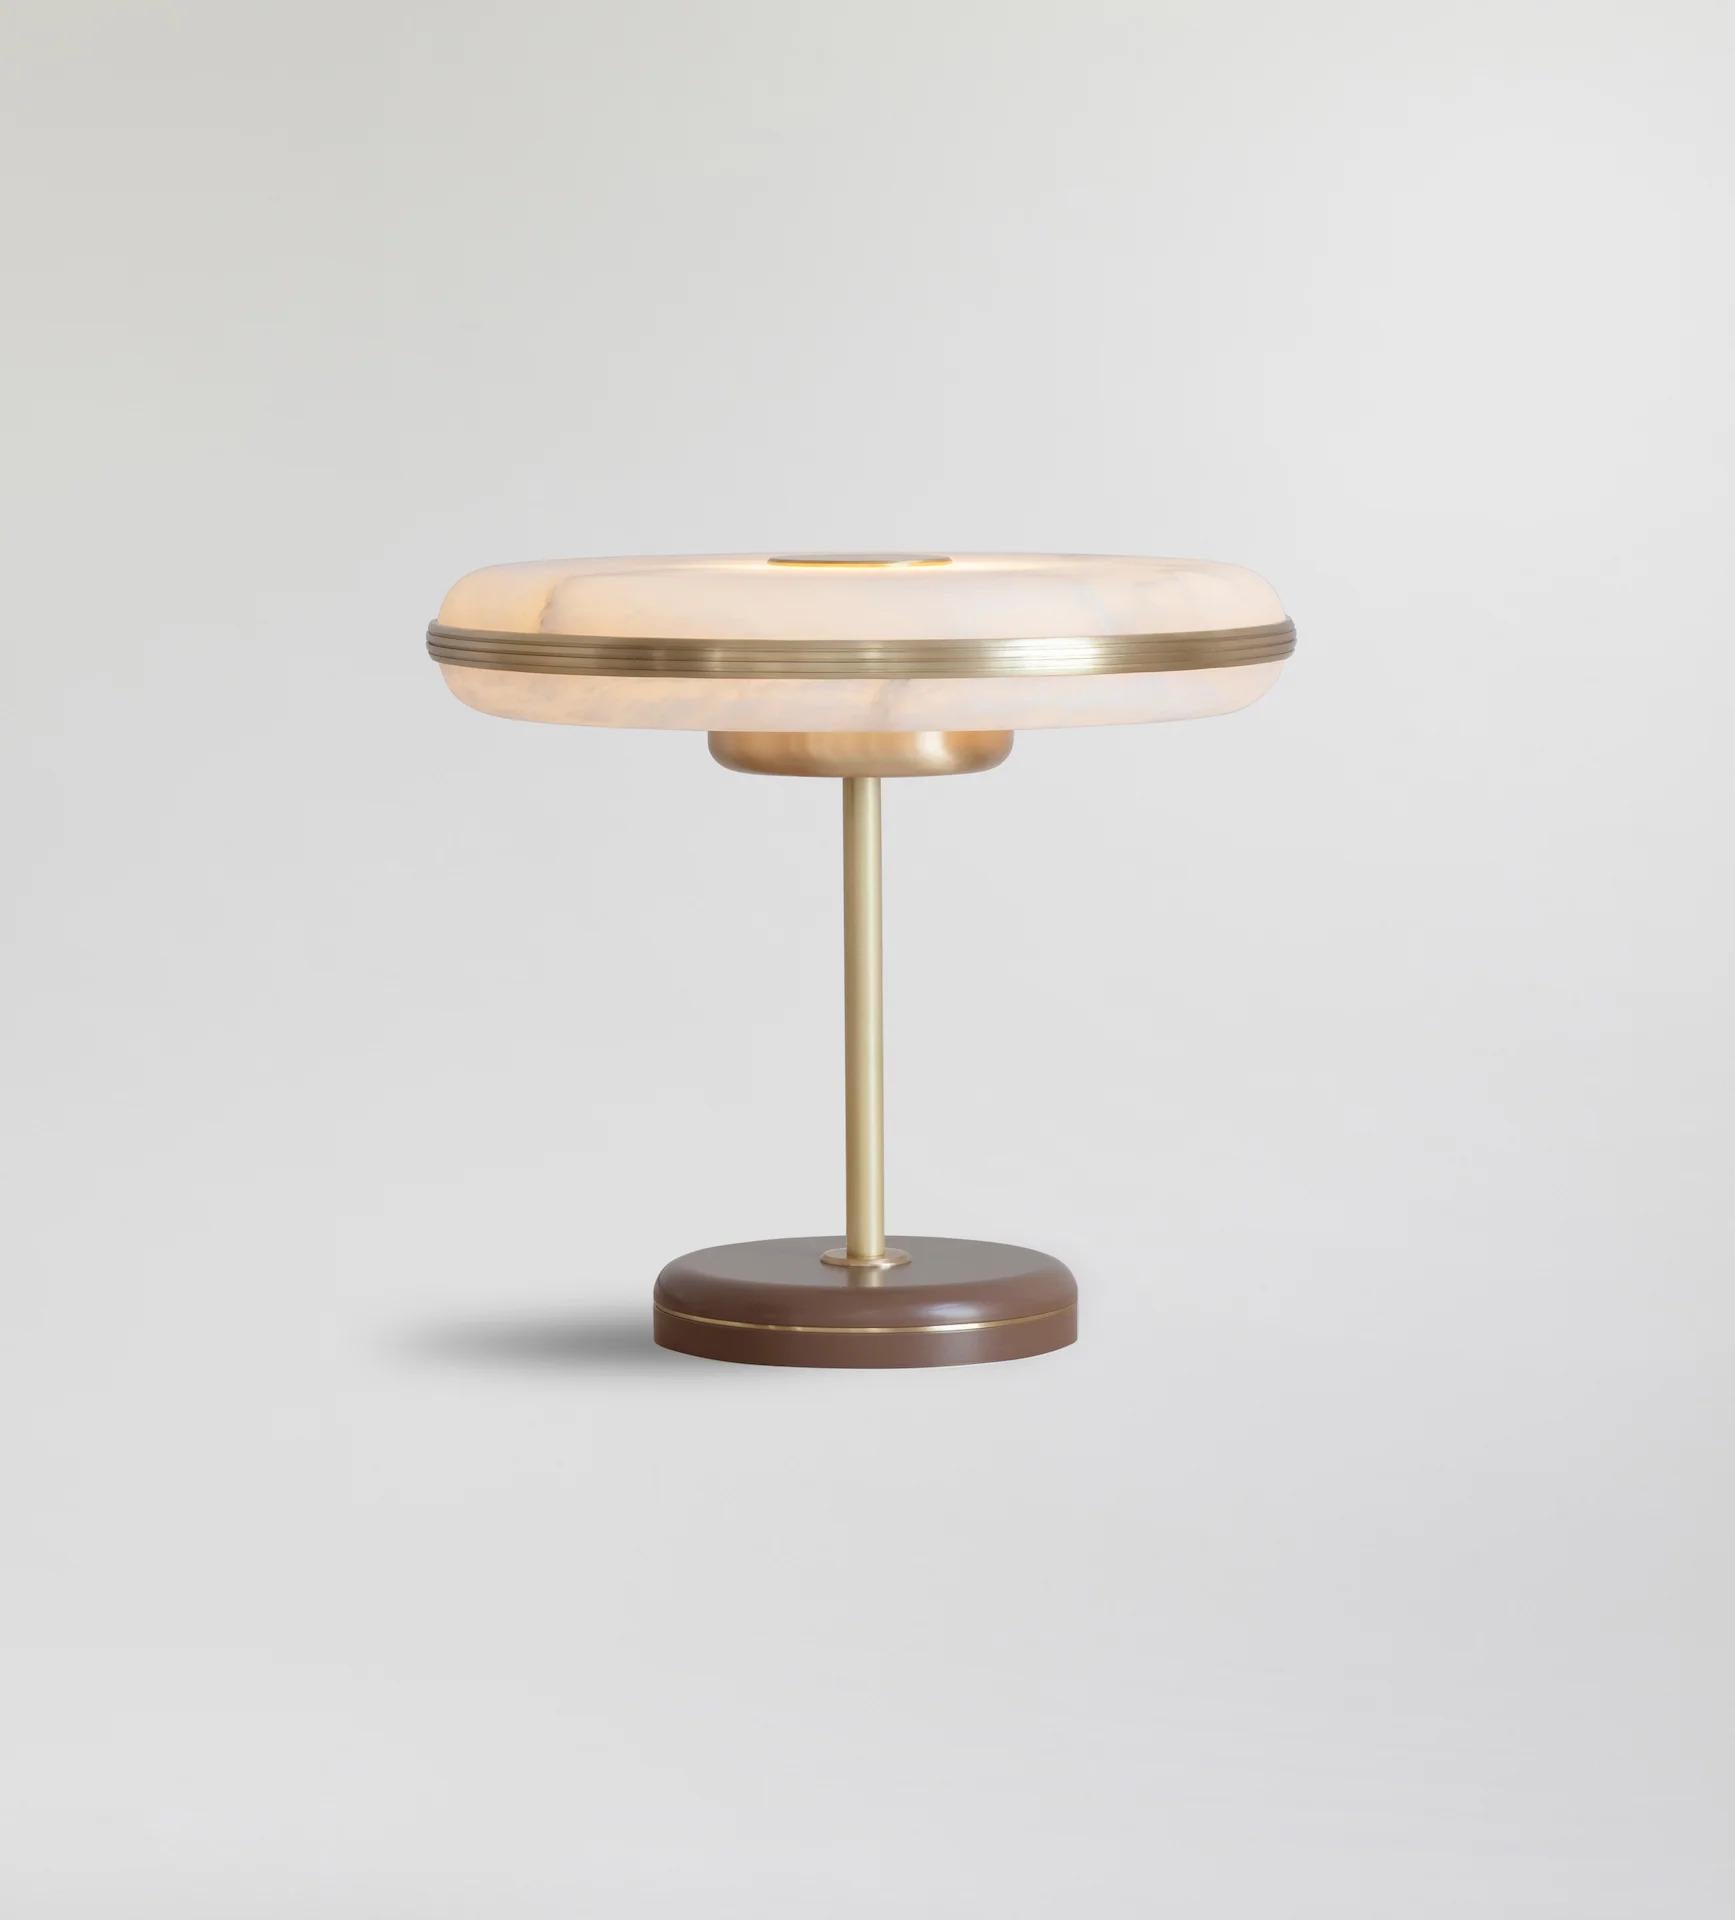 Beran Brushed Brass Large Table Lamp by Bert Frank
Dimensions: Ø 36 x H 32 cm.
Materials: Brass and alabaster.
Base finish: Hazel.

Available in two different sizes. Available in different finishes and materials. Please contact us. 

The natural